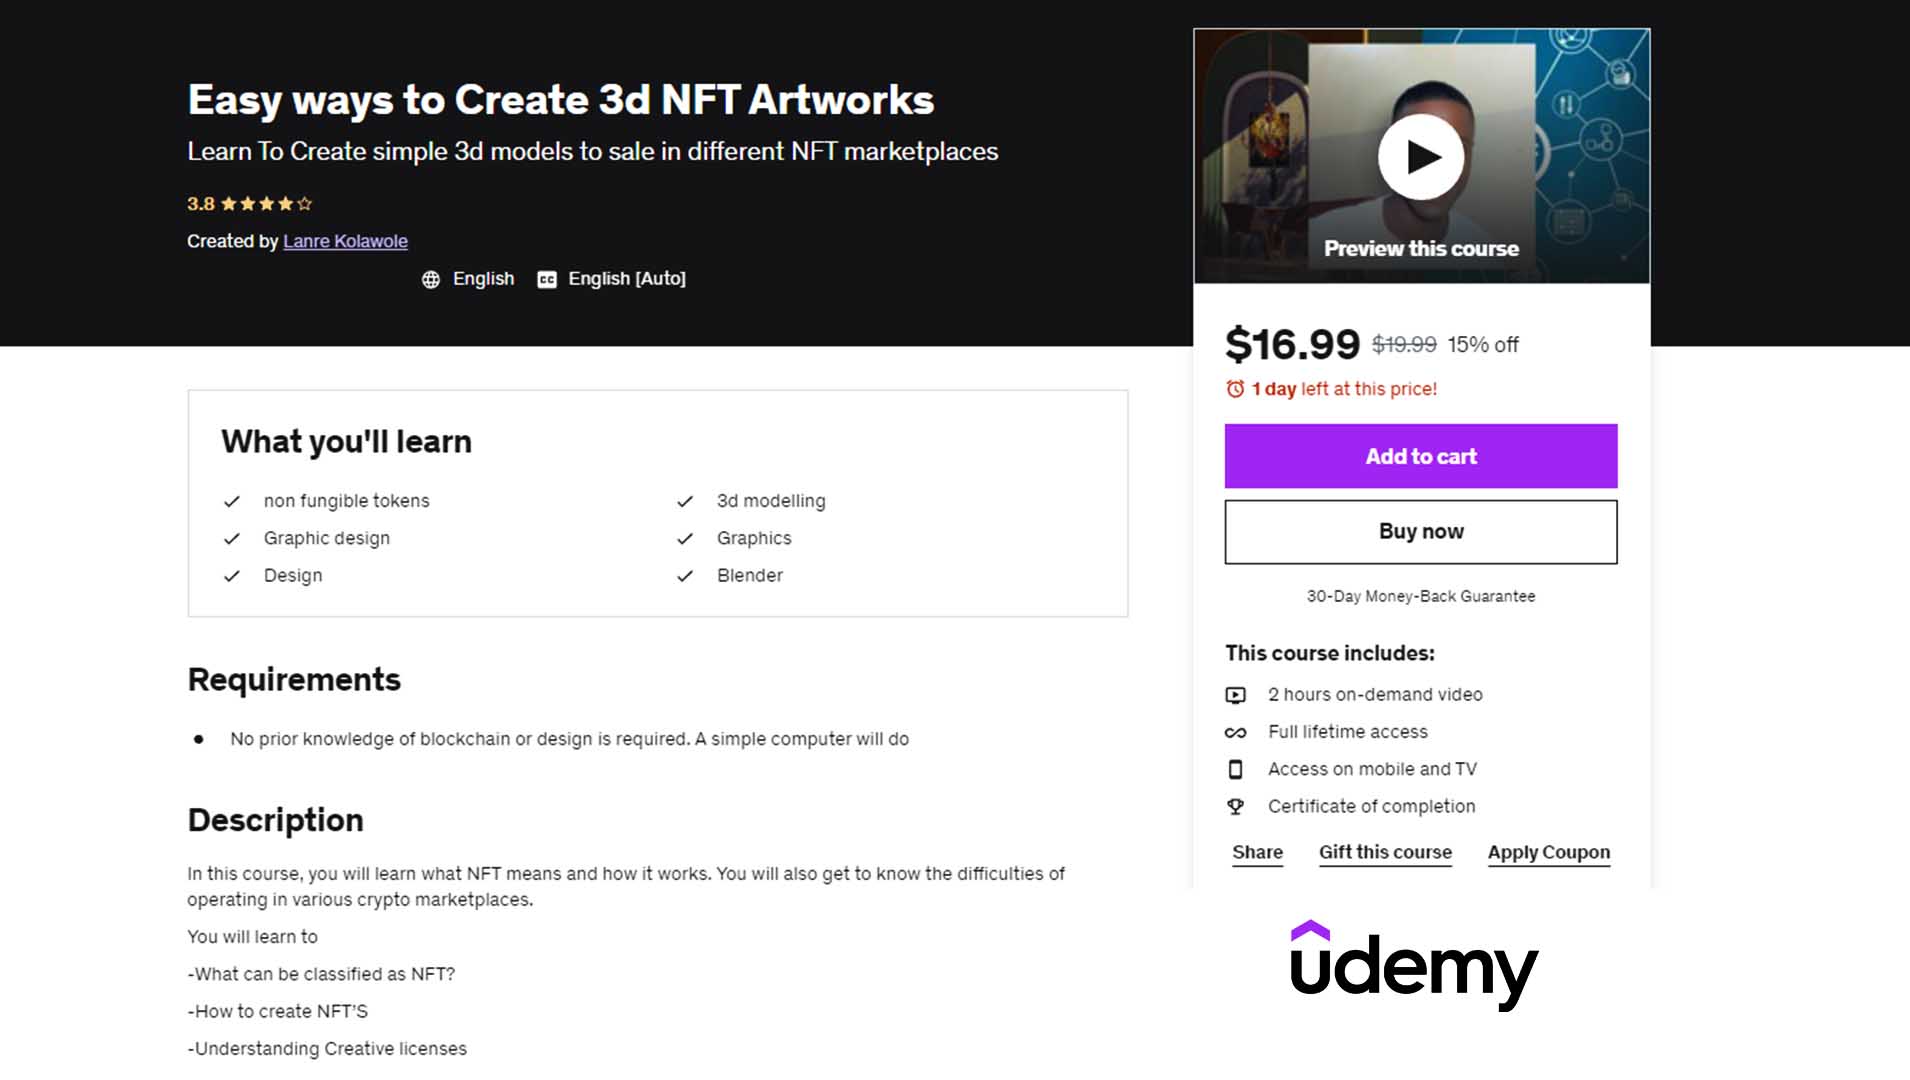 Easy Ways to Create 3d NFT Artworks